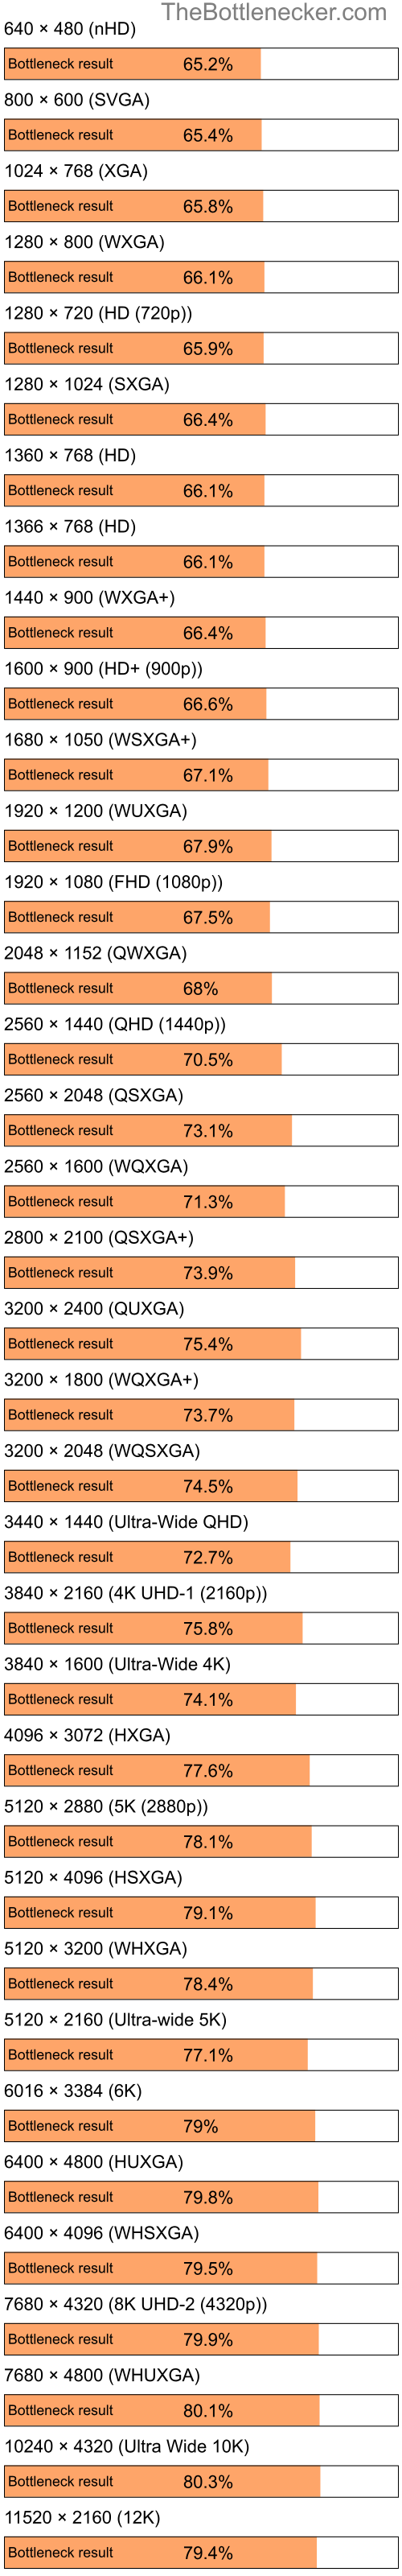 Bottleneck results by resolution for Intel Pentium 4 and NVIDIA GeForce 7500 LE in General Tasks